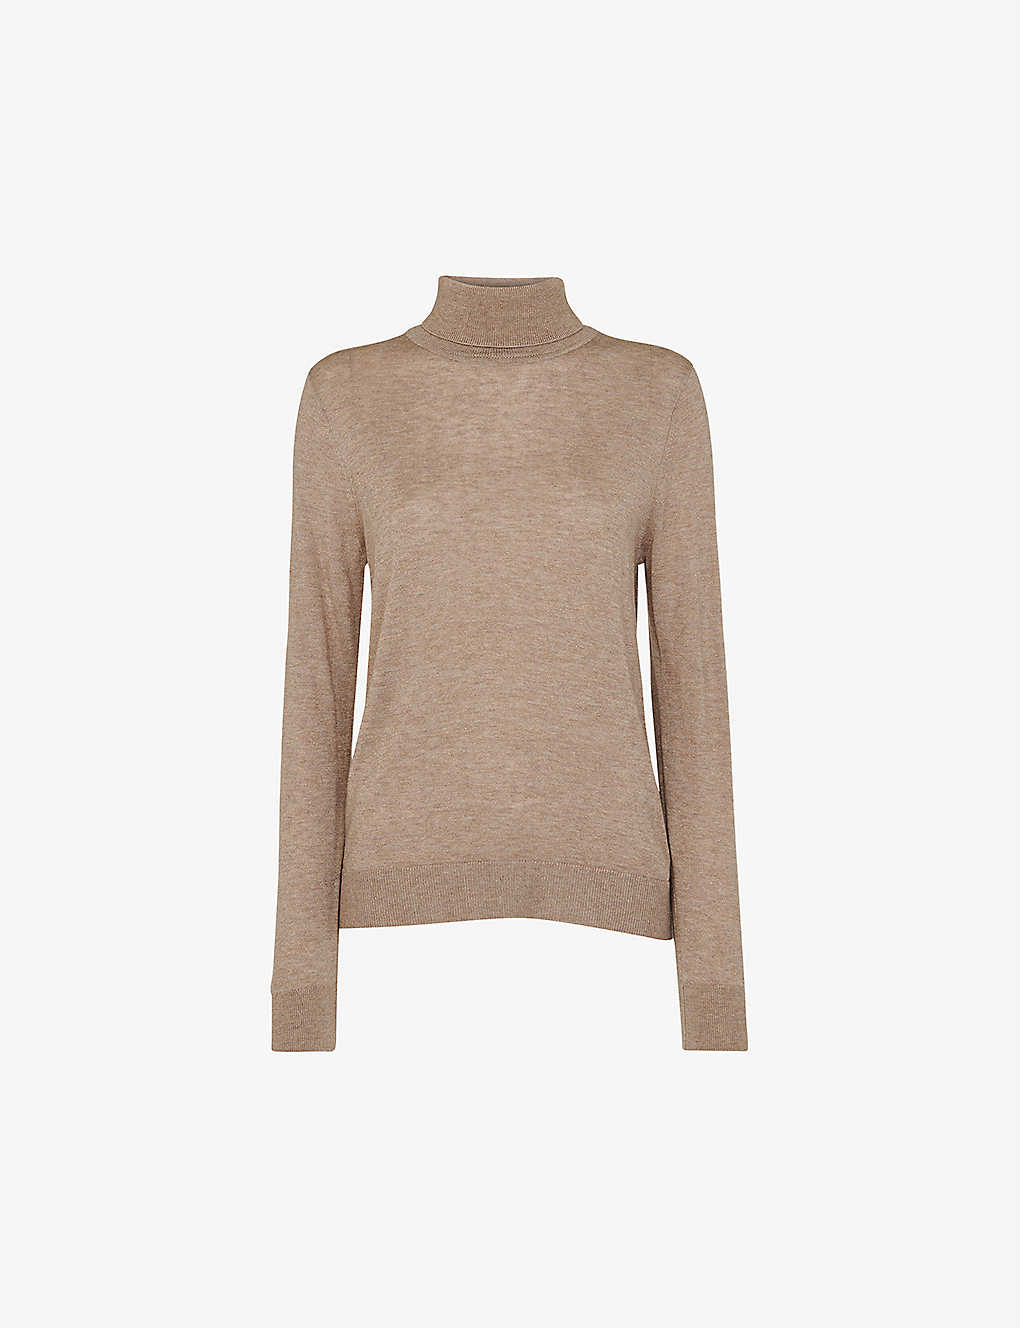 Whistles Sparkle Knit Jumper In Oatmeal